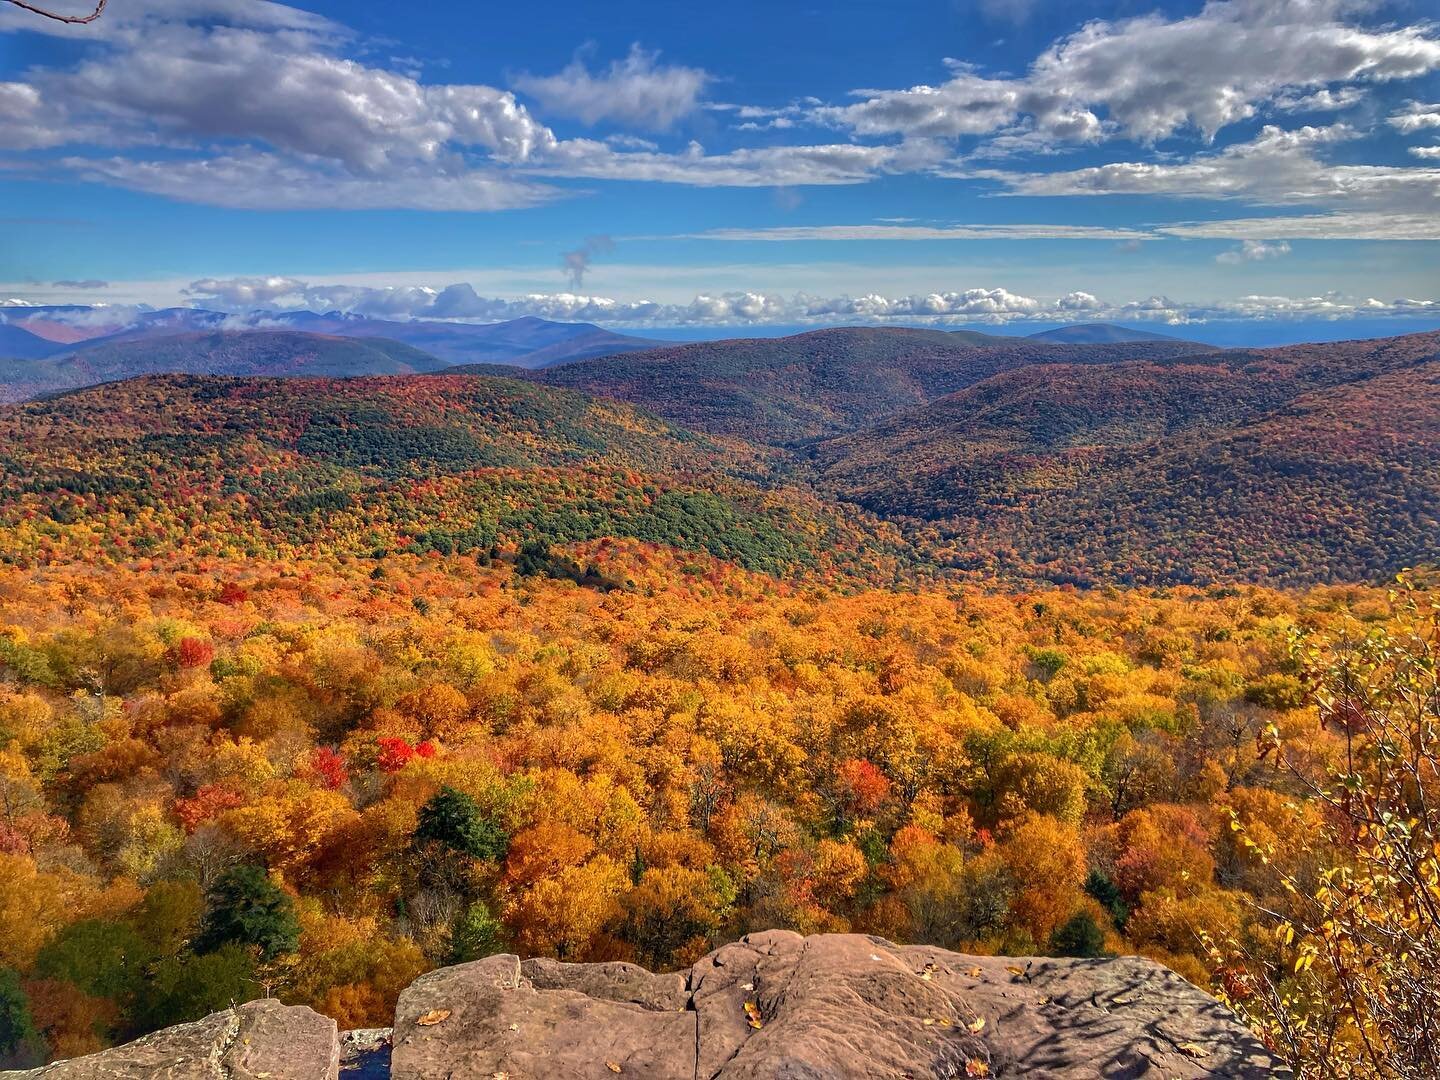 These 🍁 vibes got us crazy for the Catskills! Who is hitting the trails for some prime 🍂 peeping? #visitcatskills #catskills #thecatskills #catskillsmountains #catskill #catskillsny #upstateny #upstatenewyork #fallfoliage #fallinnyc #fallinny #scen